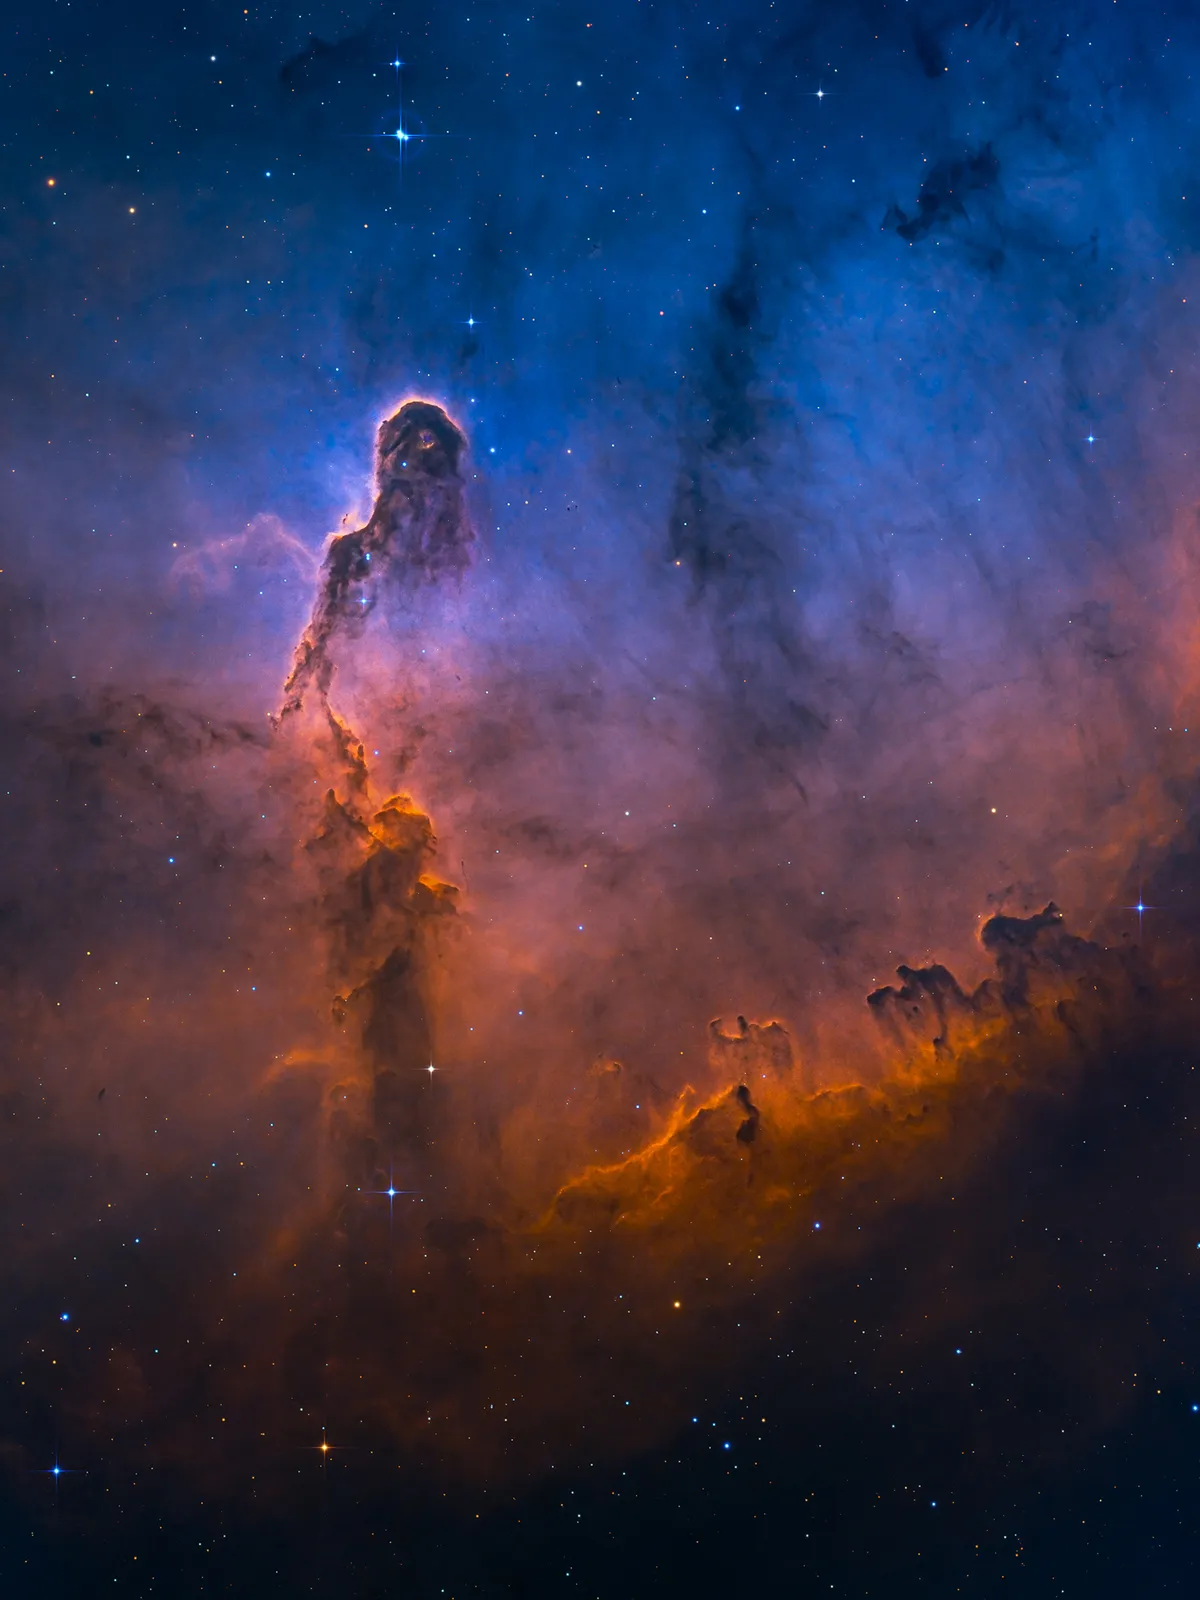 The Misty Elephant's Trunk Min Xie (USA). Highly commended, Stars and Nebulae. Equipment: Takahashi FSQ-85 EDP, Astrodon 3 nm filters, Astro-Physics Mach1GTO CP3 mount, ZWO ASI1600MM-Pro camera.